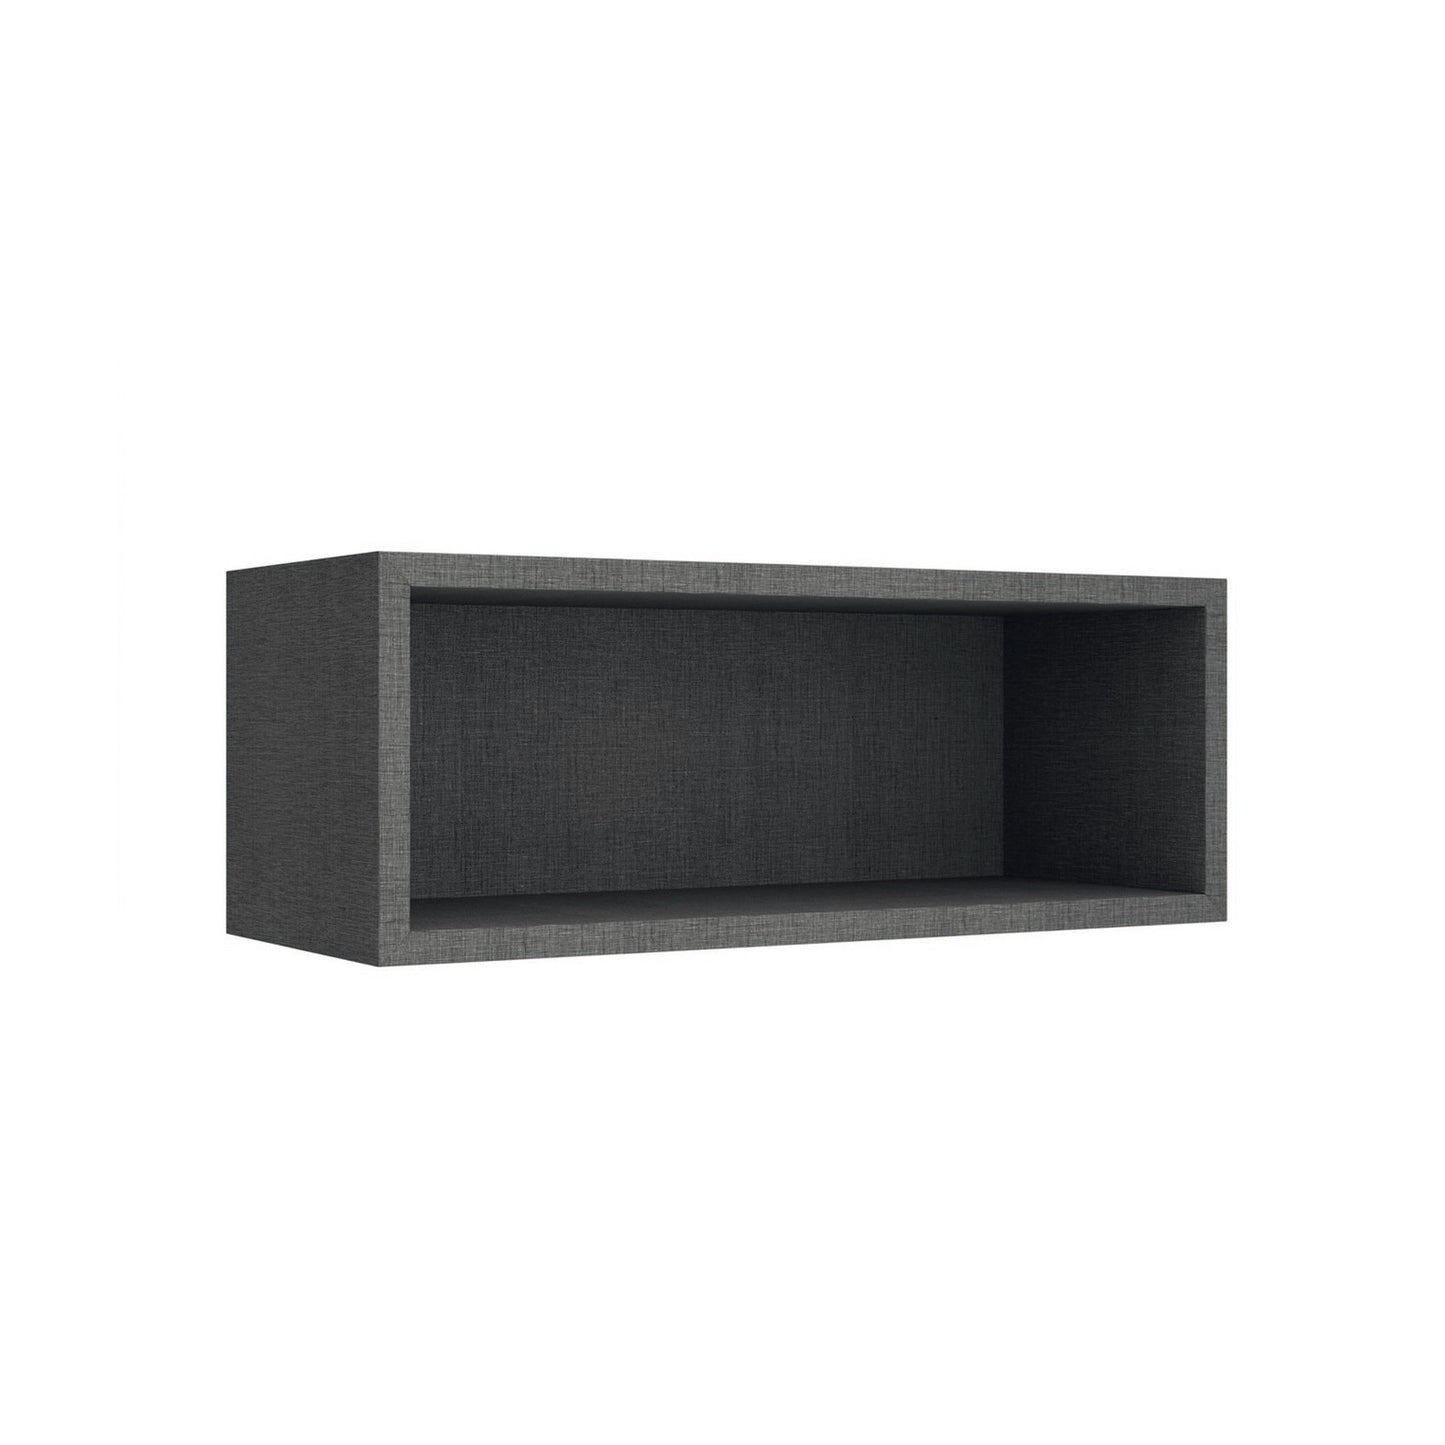 Wall-hung storage unit Alliance 16 inches (400) Tx